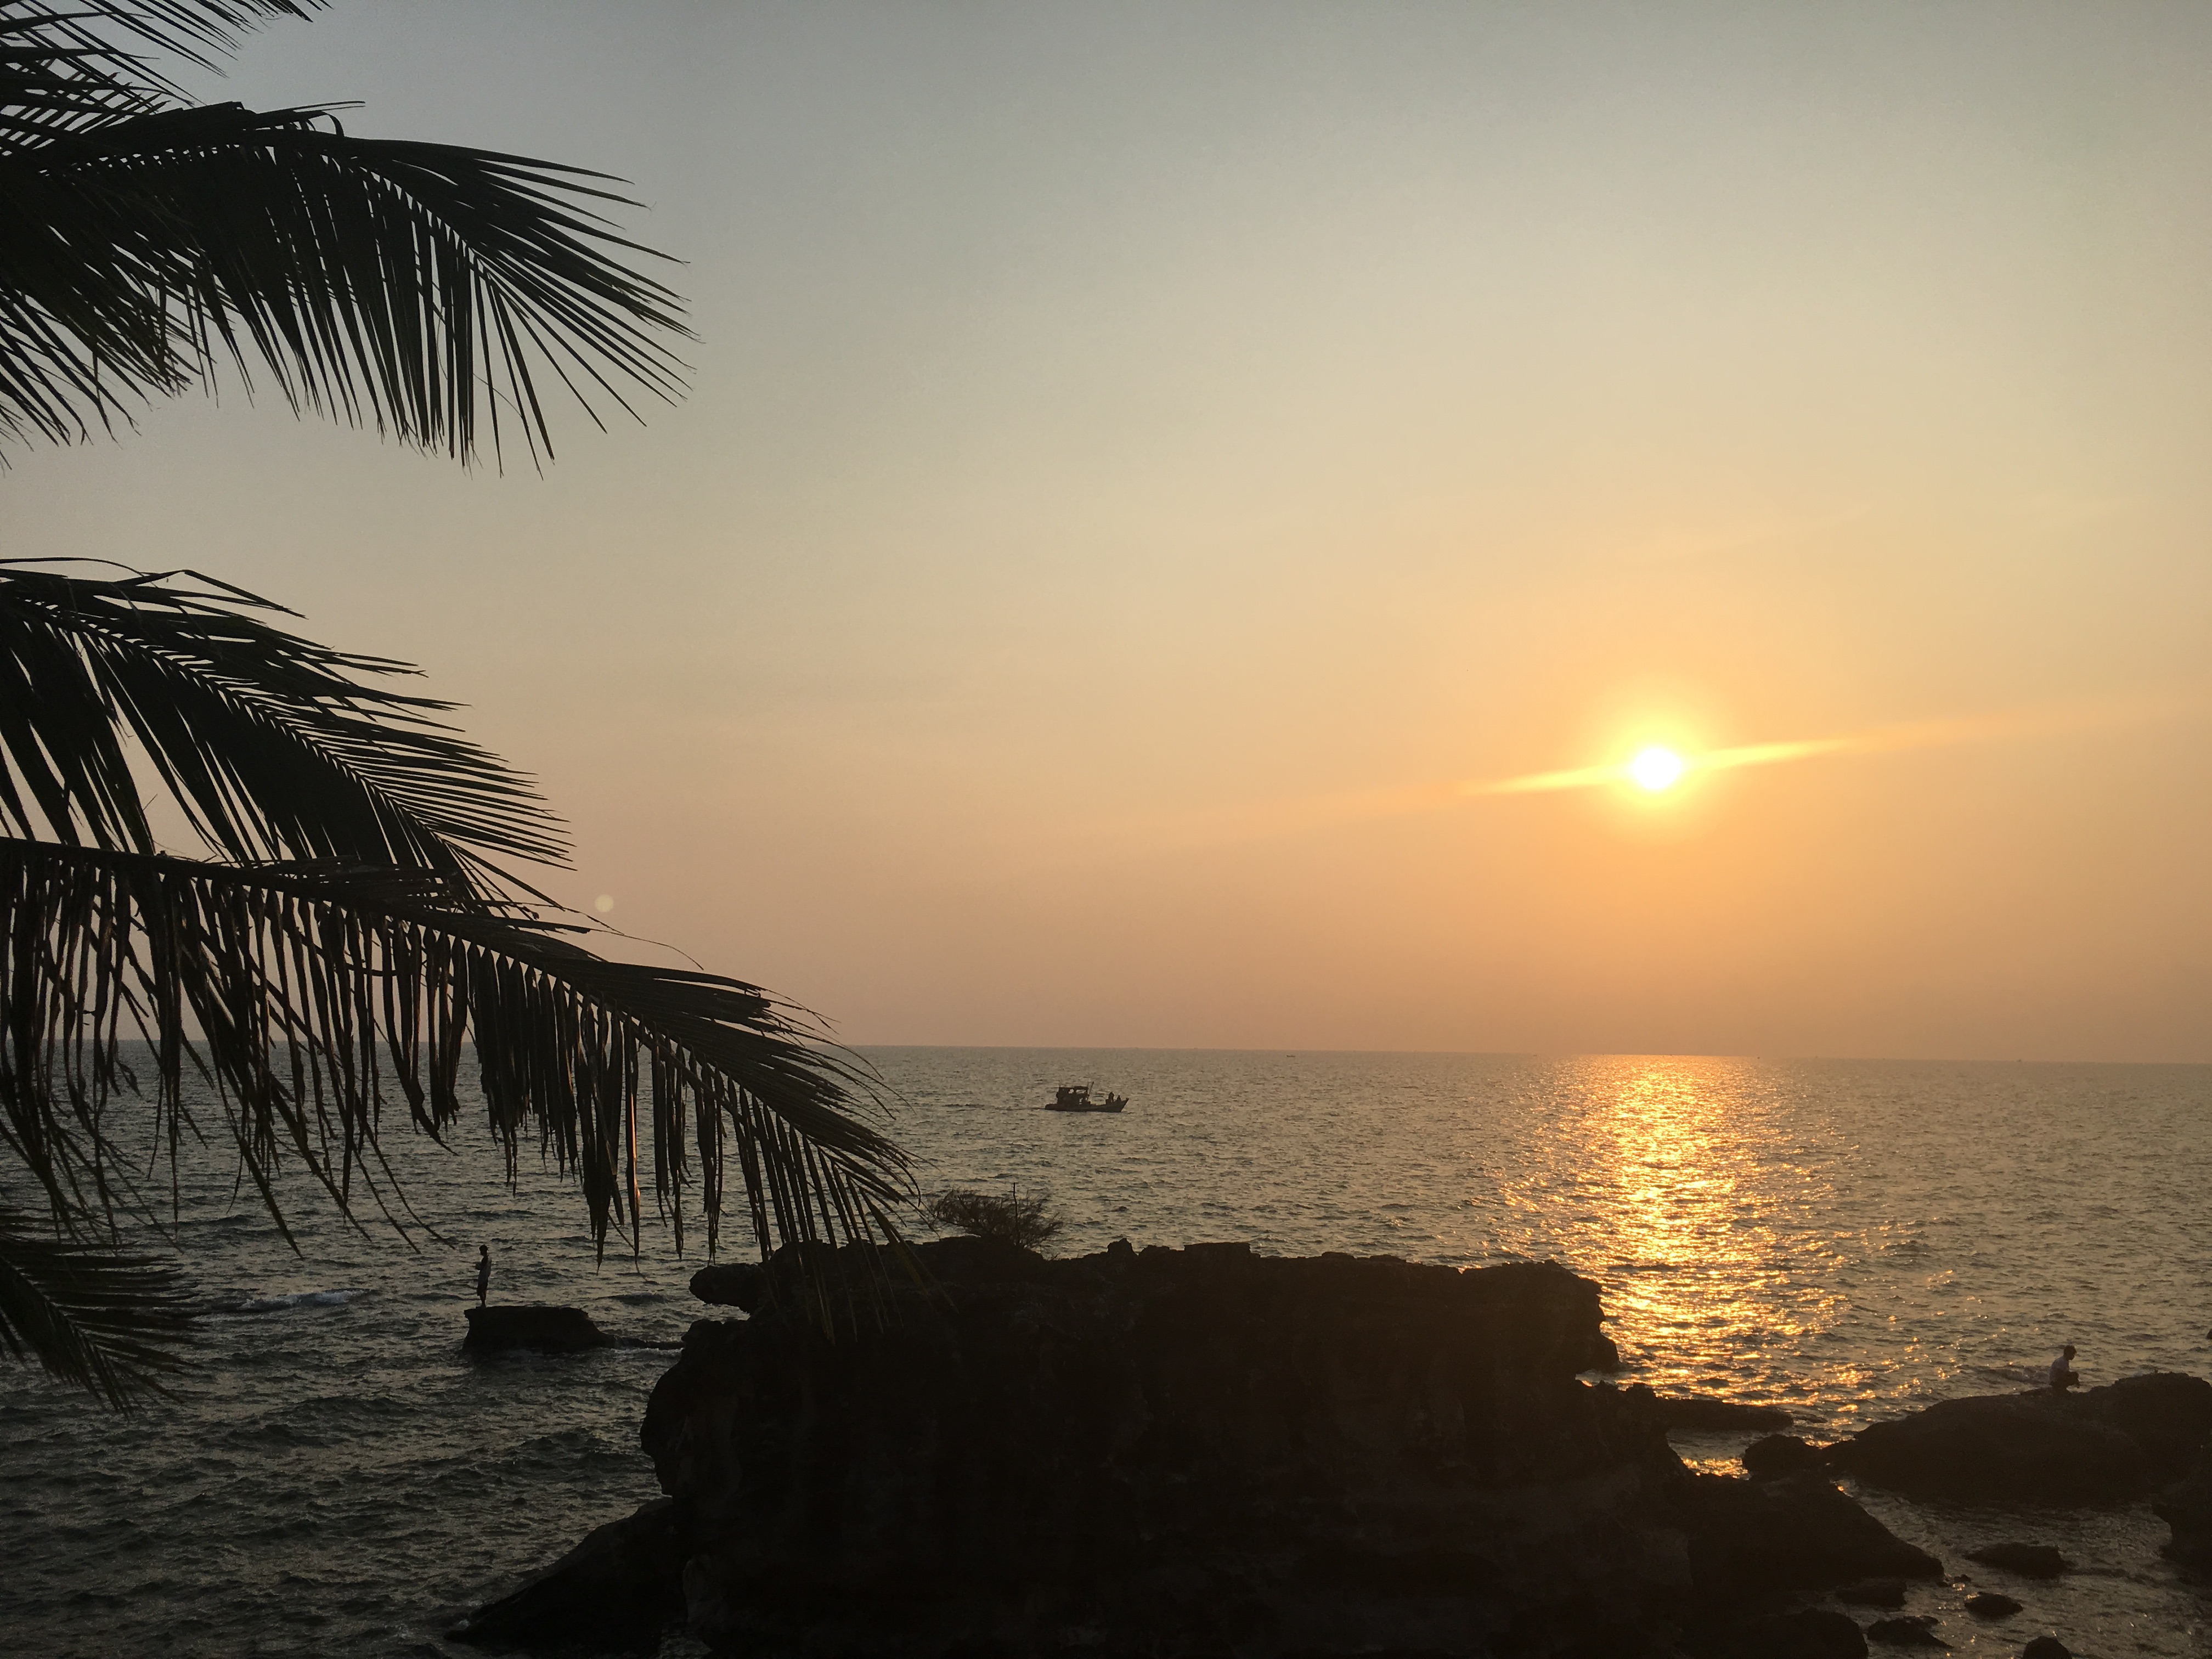 Sunset from Dinh Cau Temple in Phu Quoc, Vietnam.